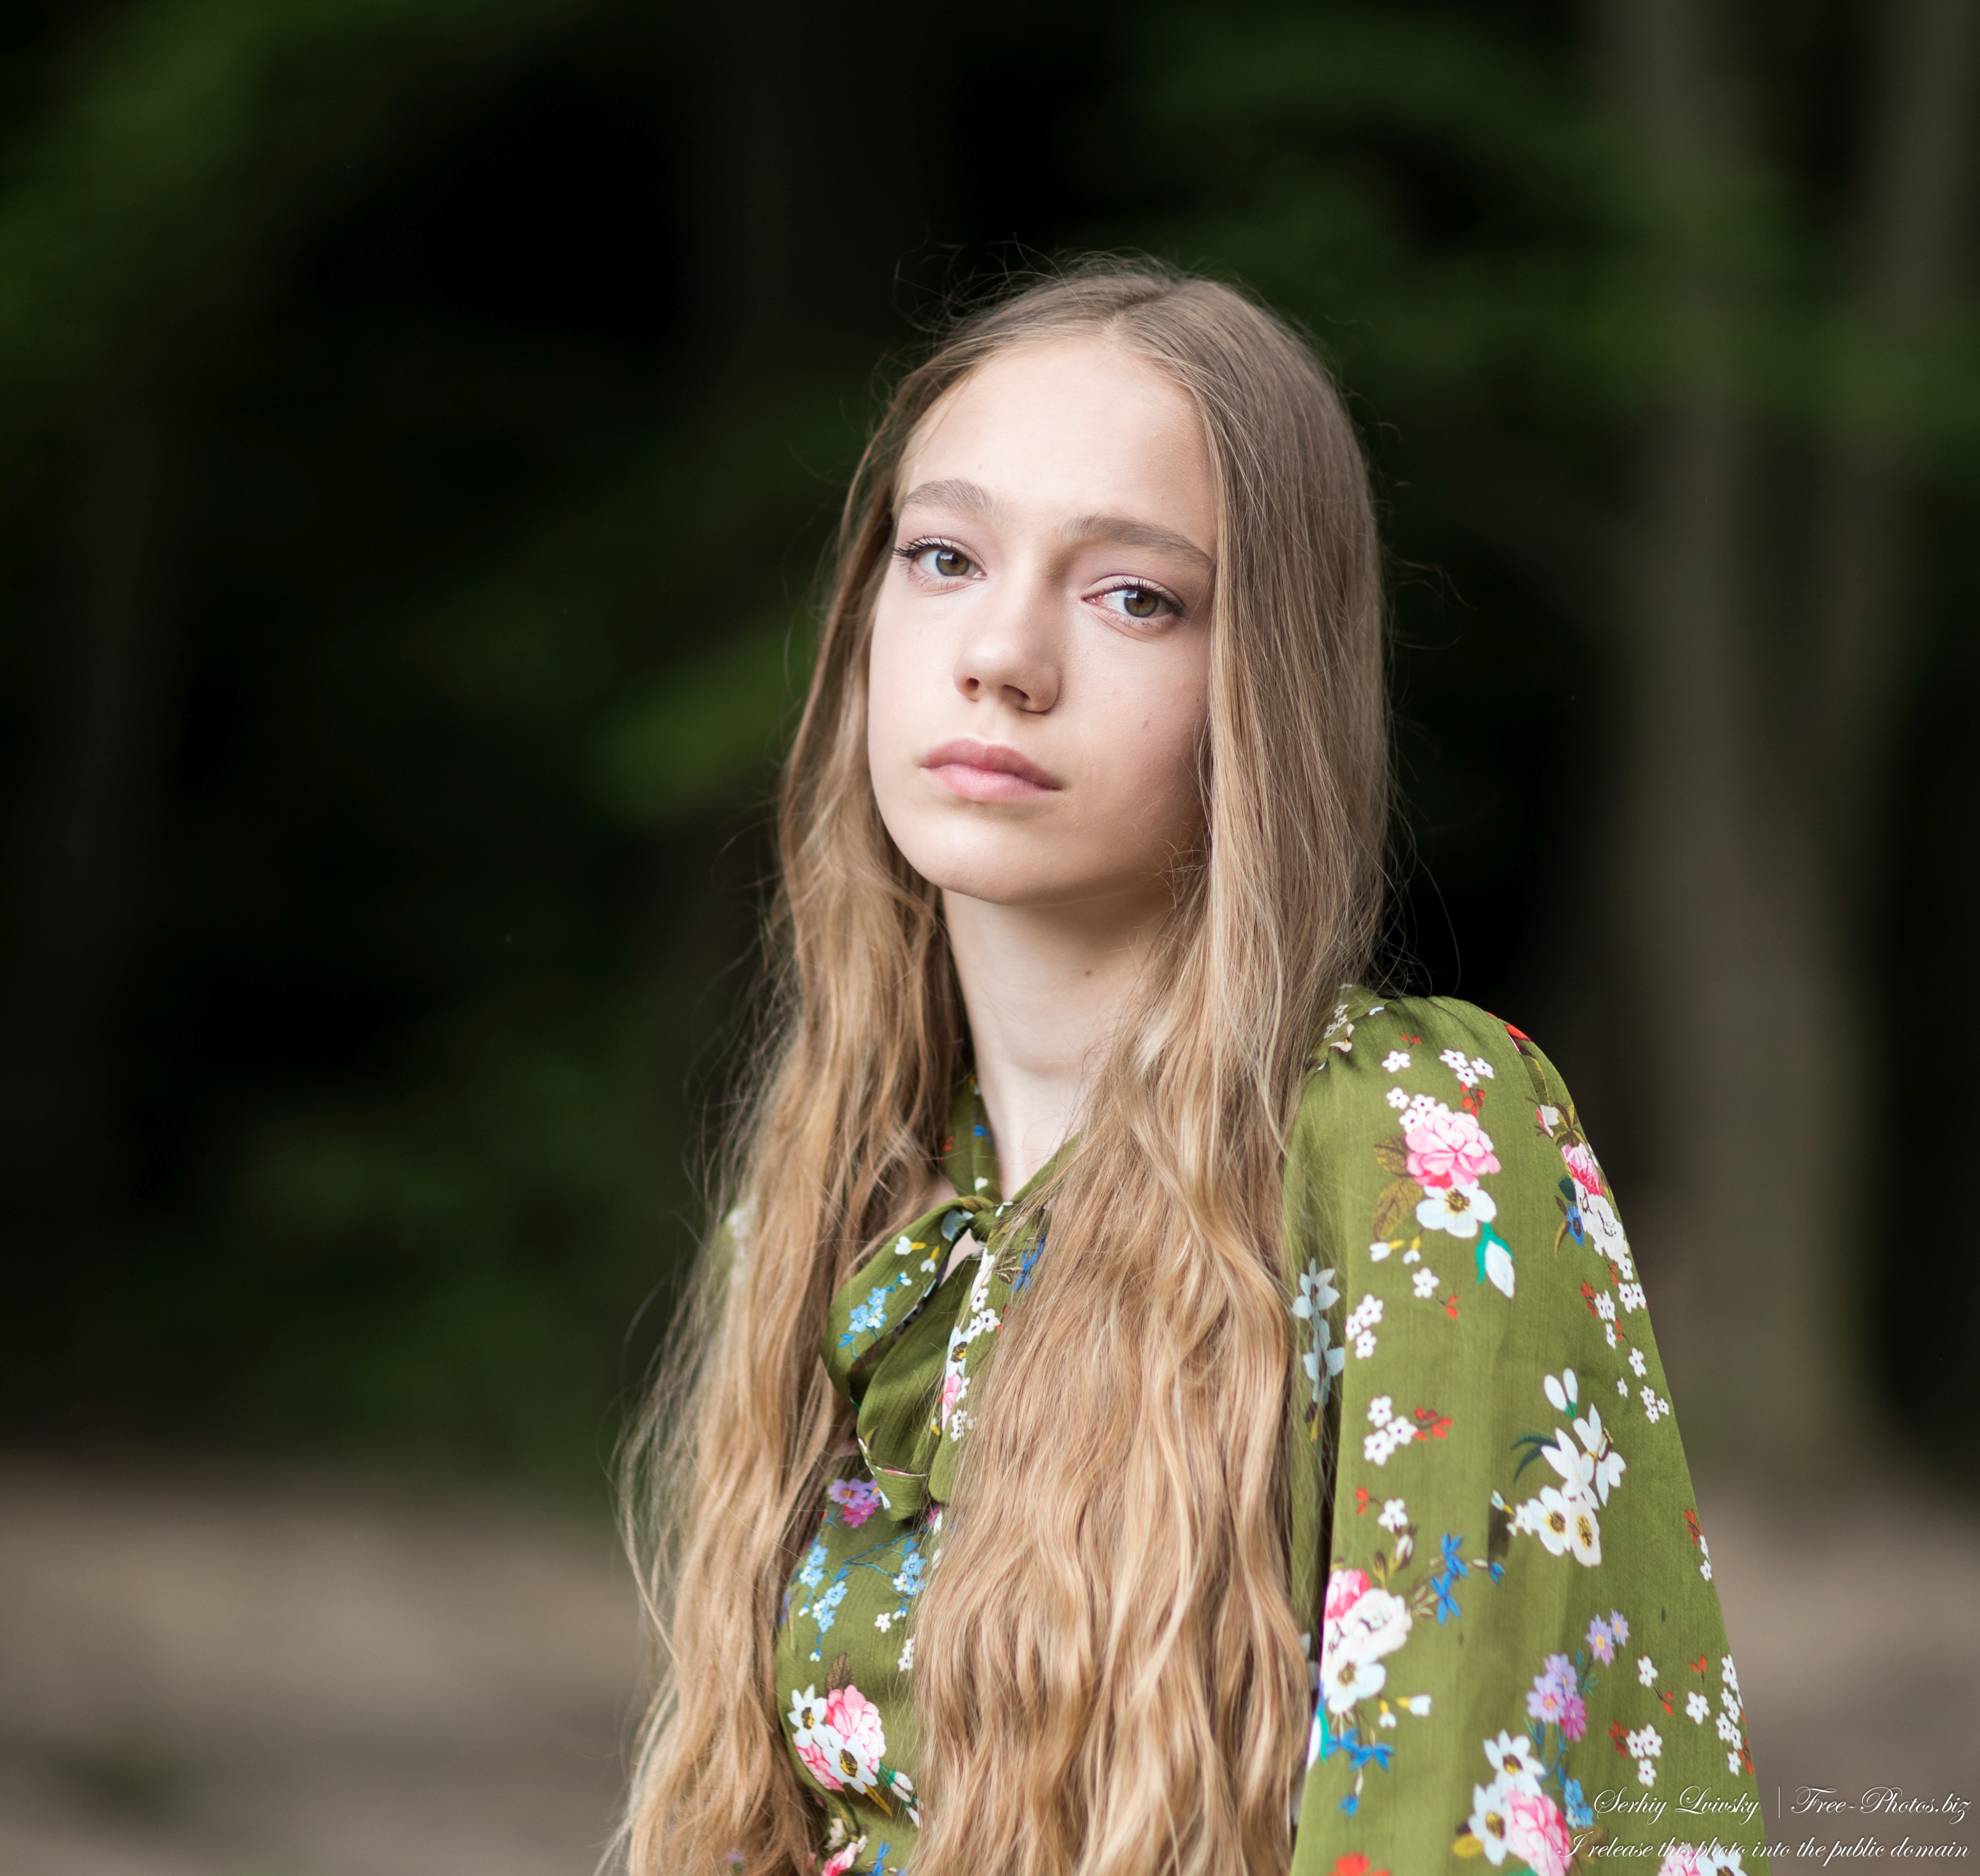 marta_a_16-year-old_natural_blonde_girl_photographed_by_serhiy_lvivsky_in_july_2020_08